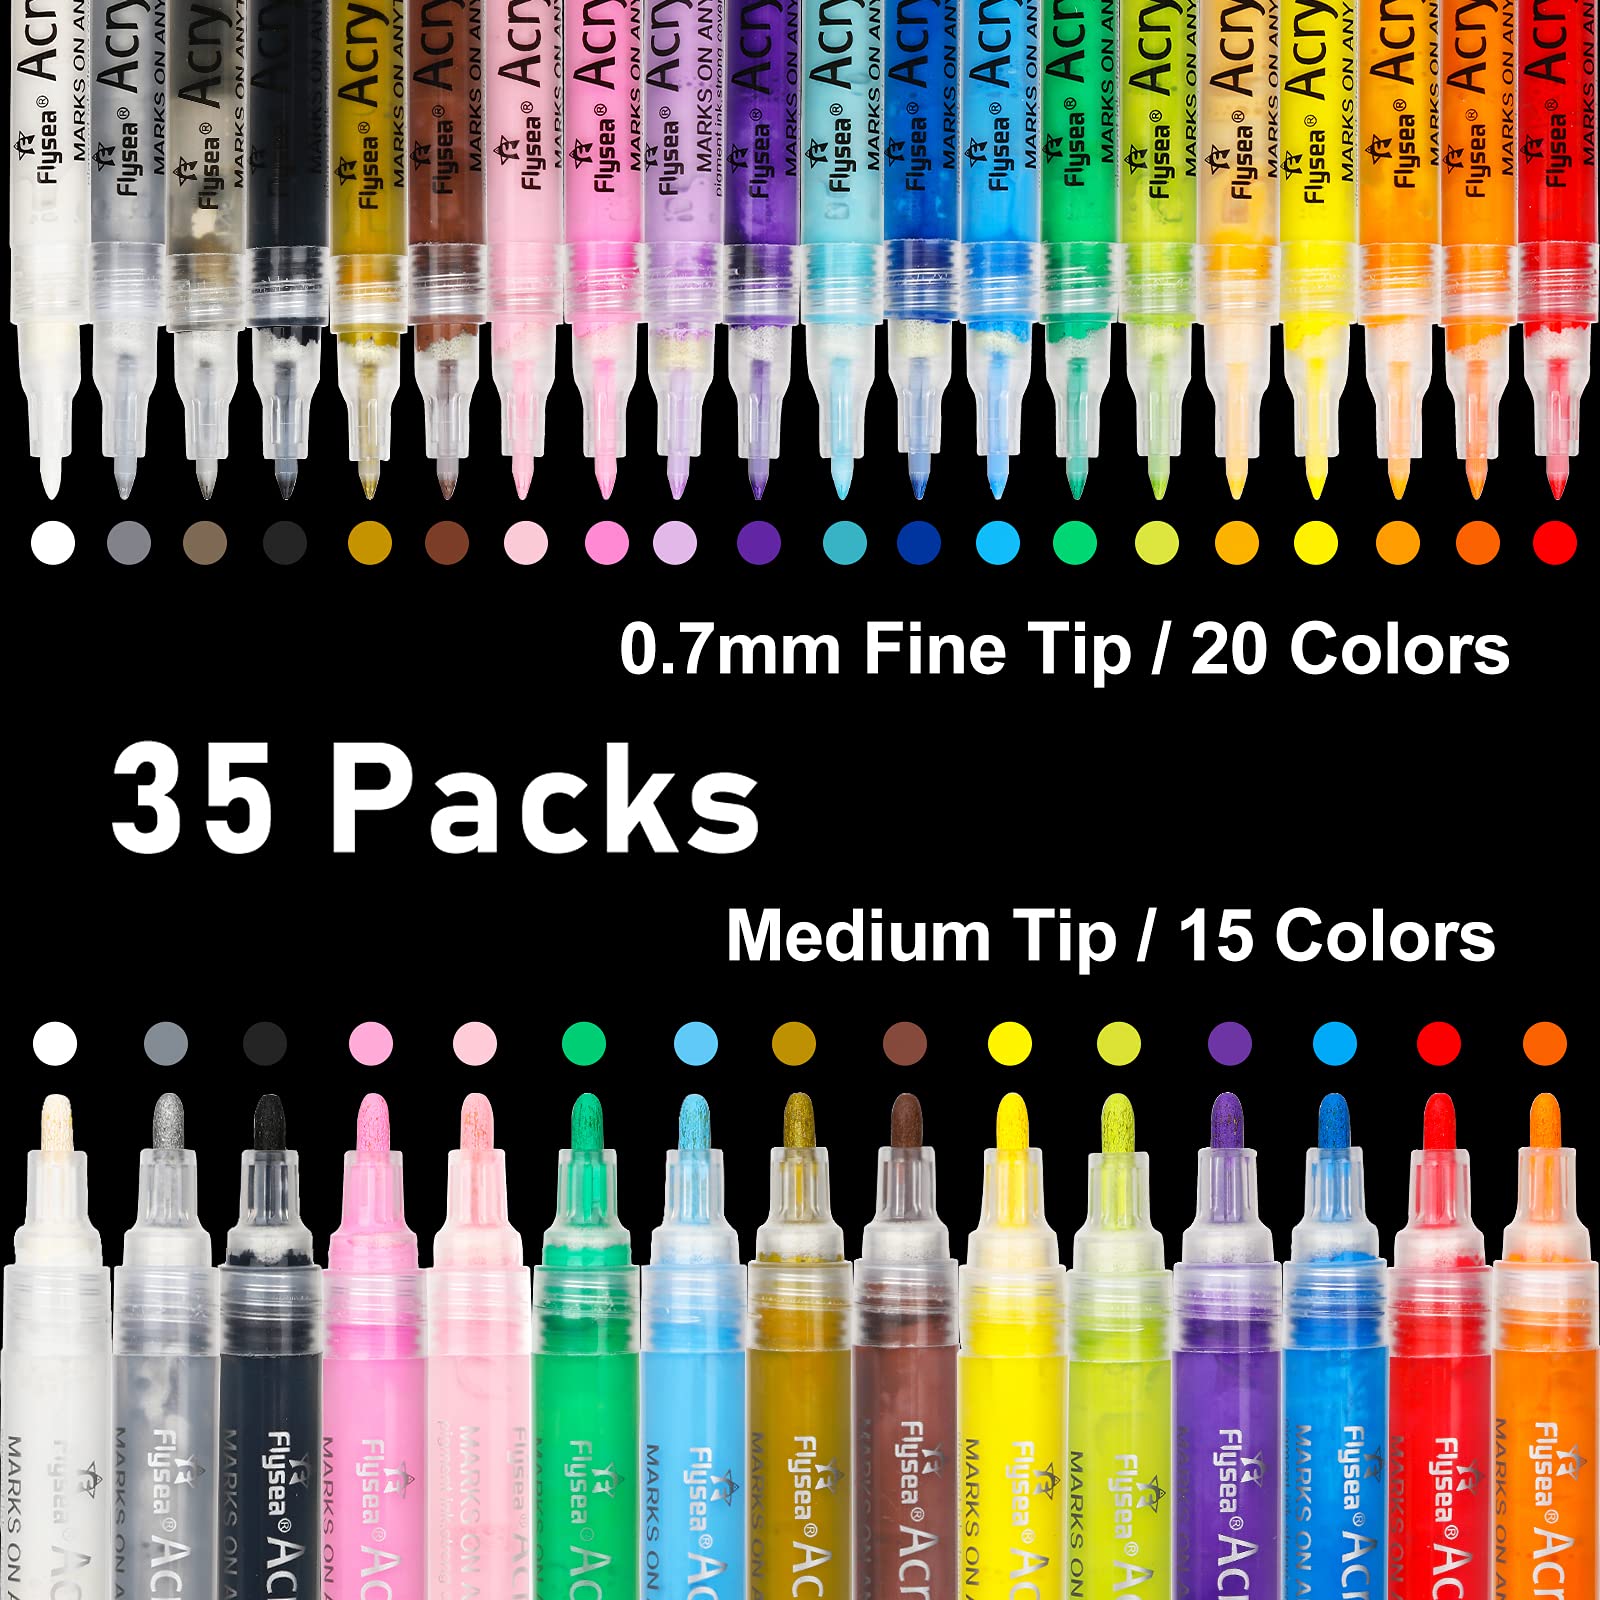  Posca Acrylic Paint Marker, Extra Fine, White : Arts, Crafts &  Sewing